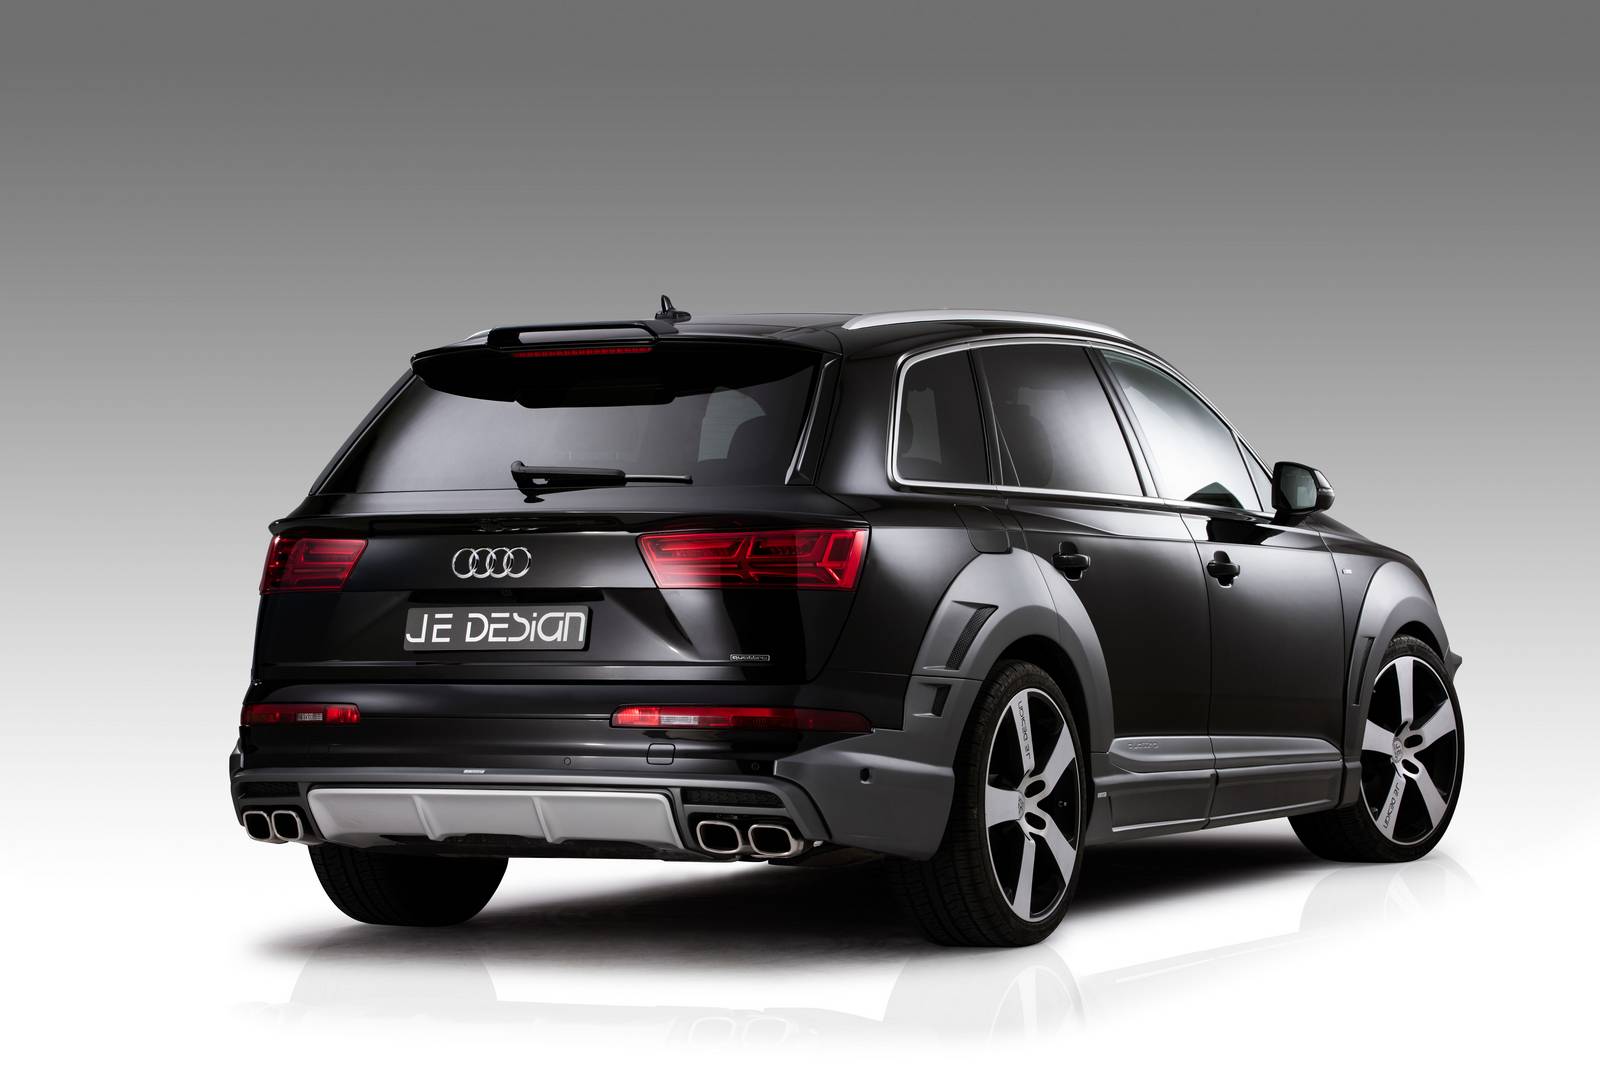 Audi SQ7 at the Rear end